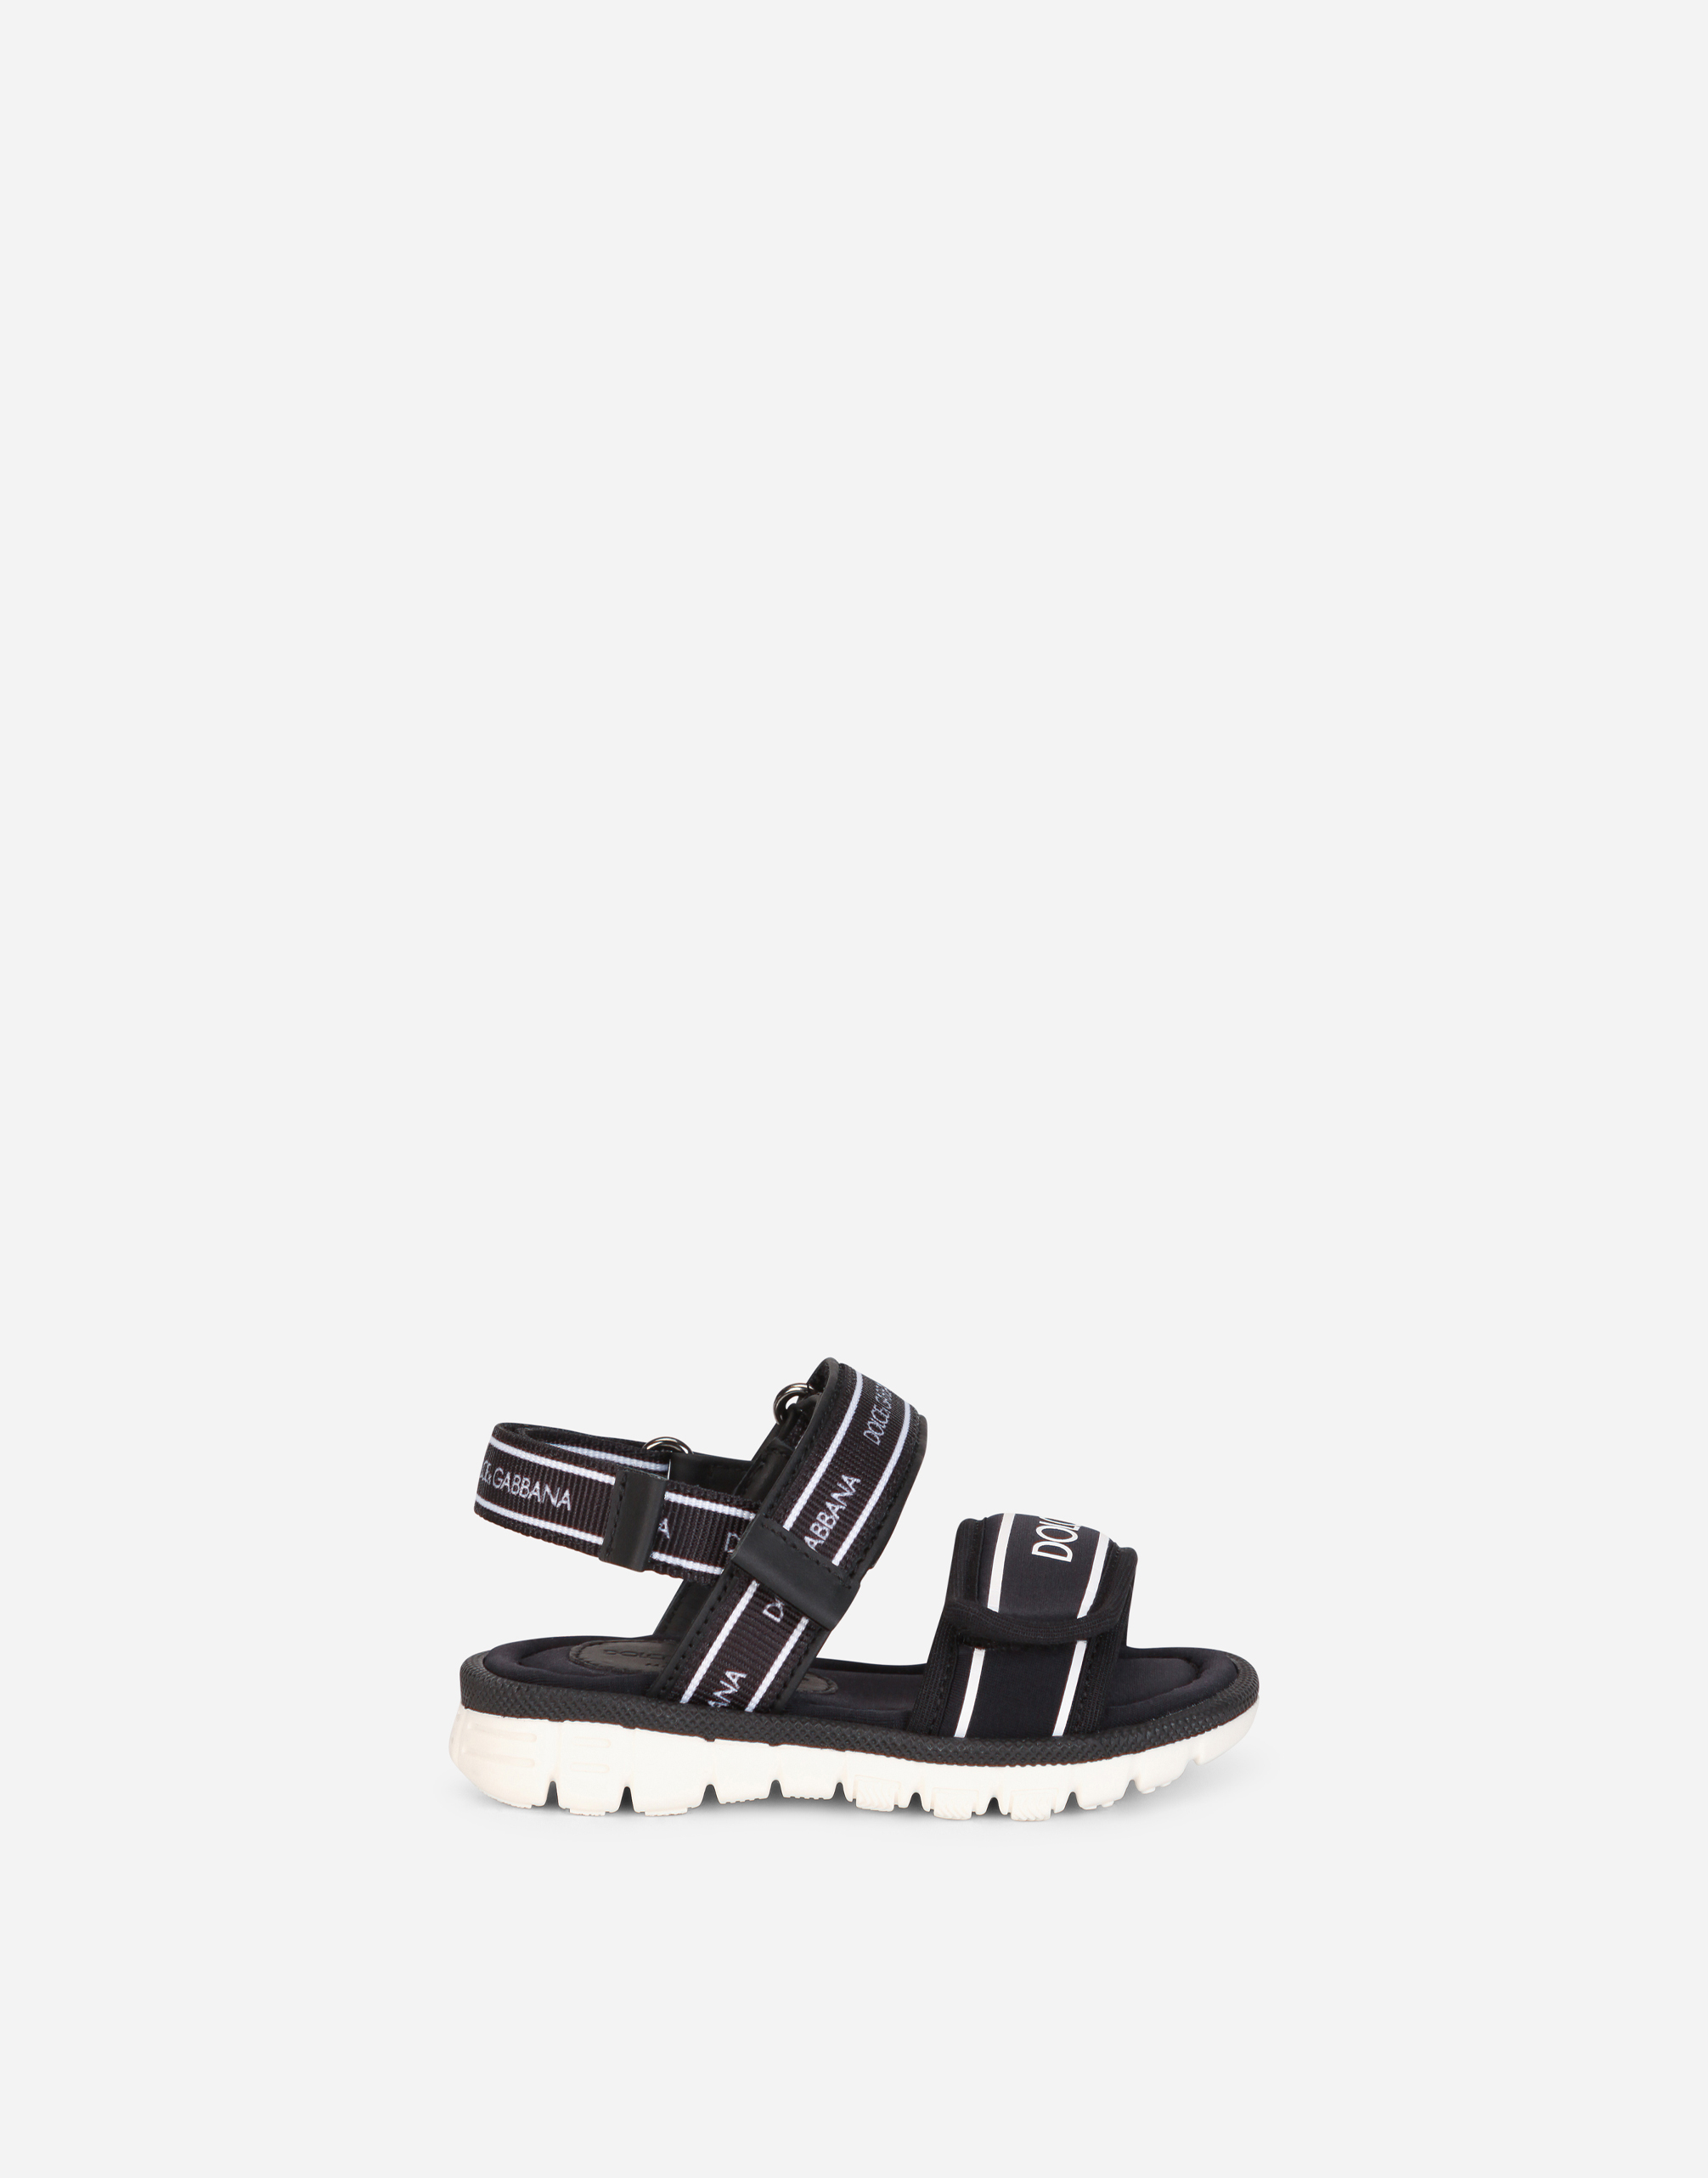 Dolce & Gabbana Babies' Solid-color Scuba Sandals With Logo Print In Black/white